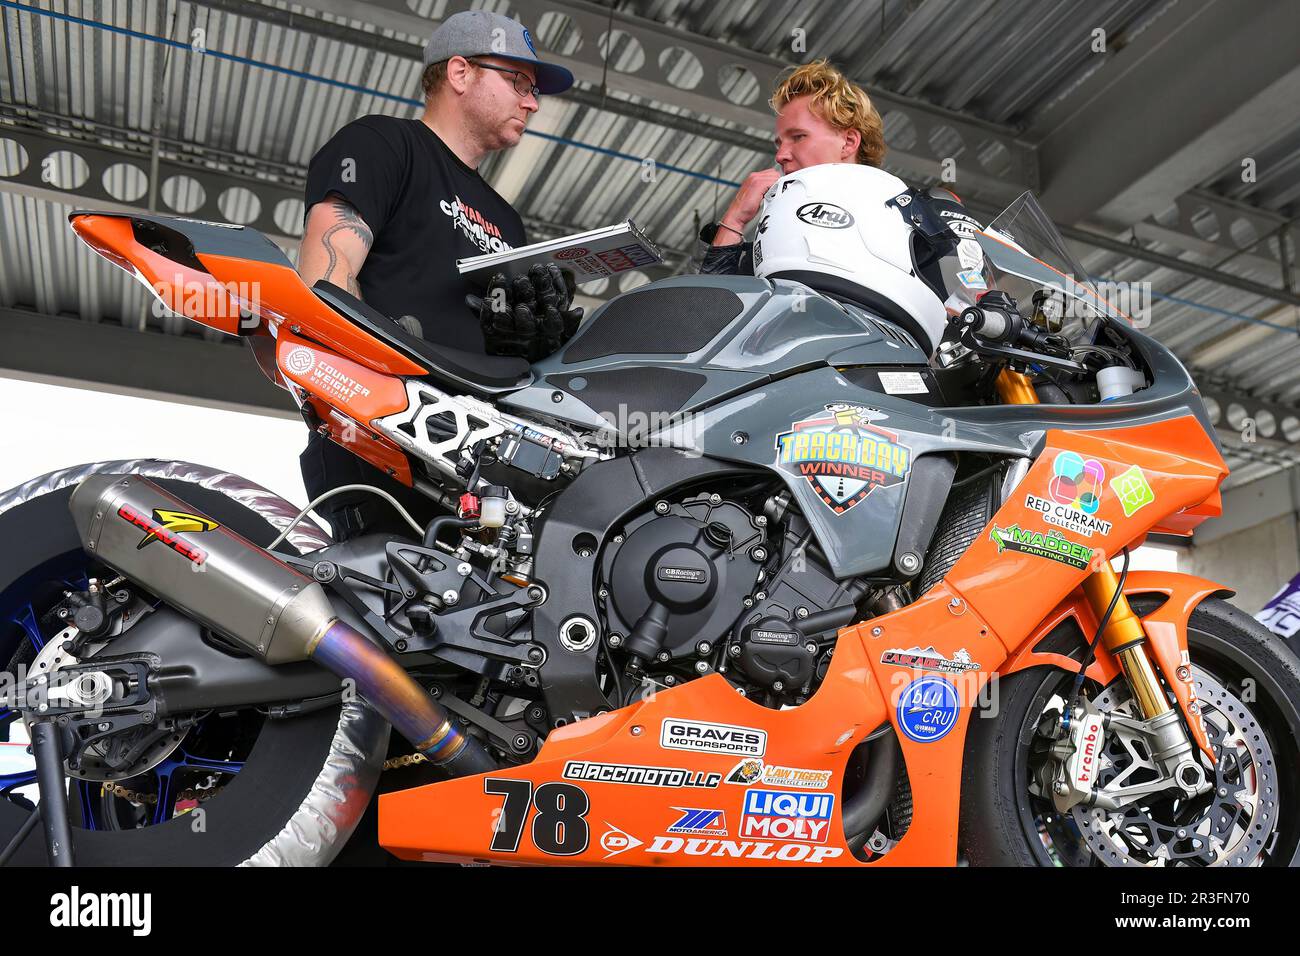 BIRMINGHAM, AL - MAY 20: CW Moto Racing rider, Benjamin Smith (78), and  their crew chief chat after the superbike race at the MotoAmerica  Superbikes at Barber on May 20, 2023; at